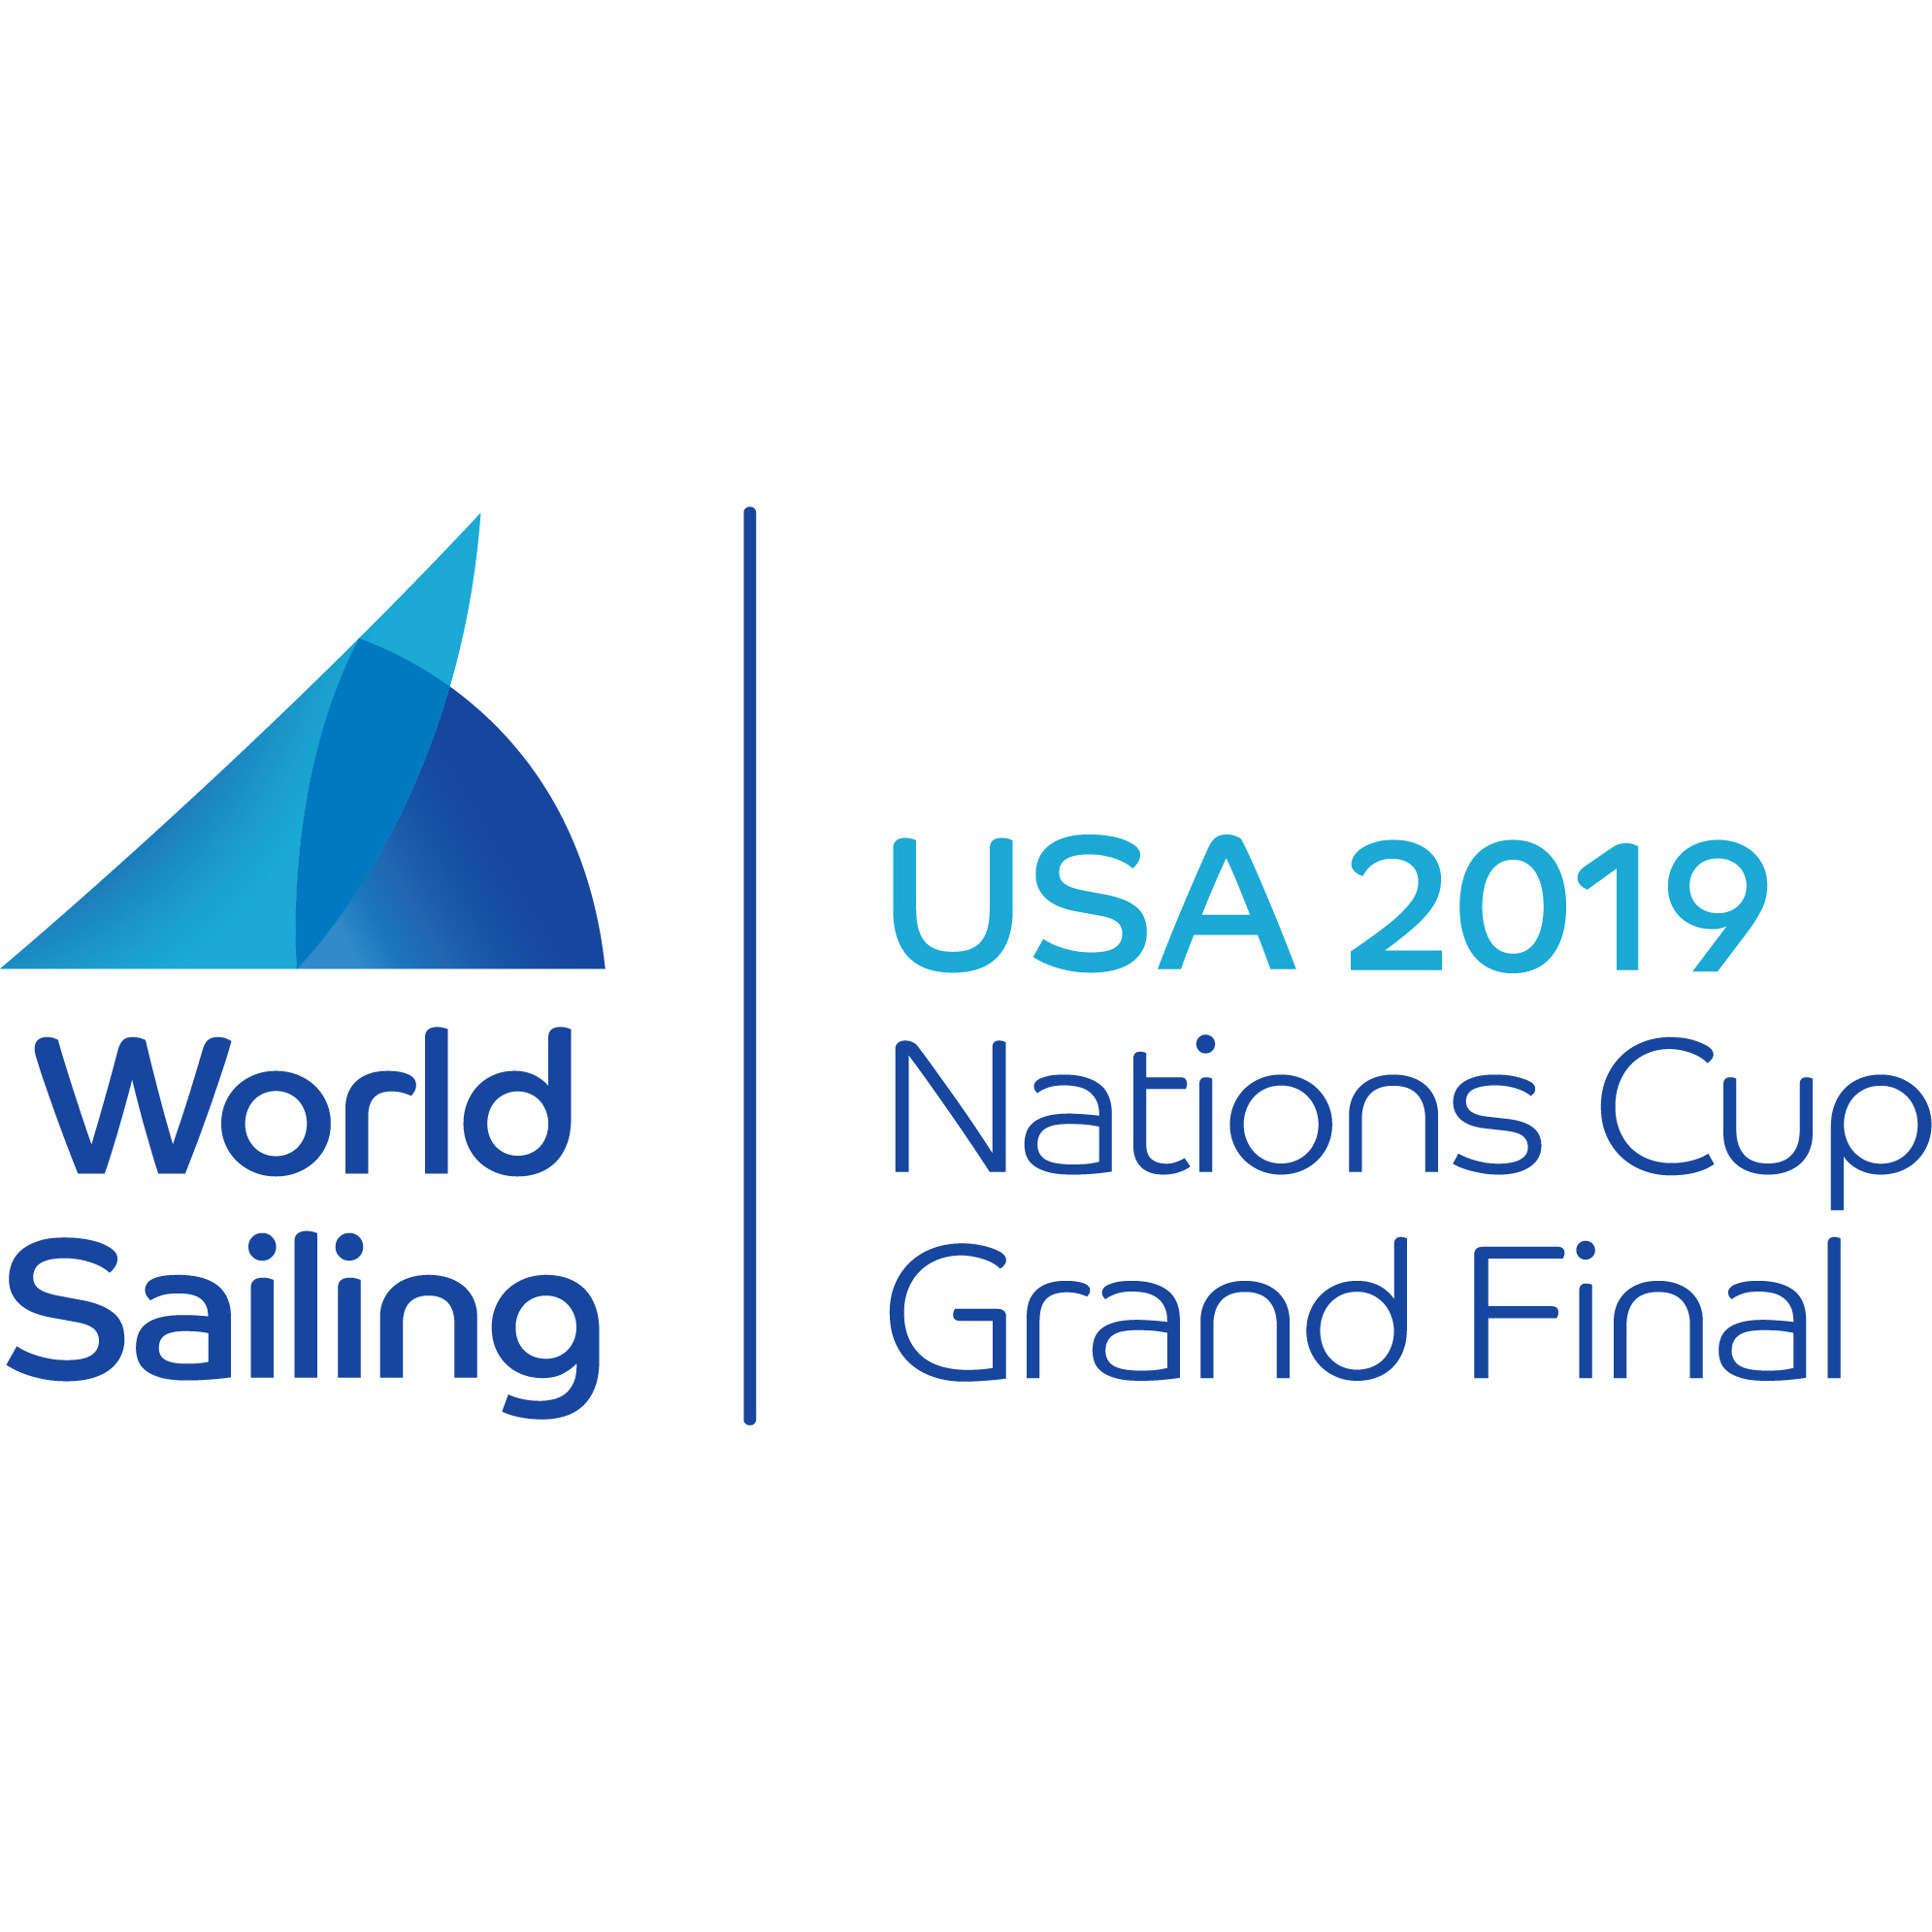 2019 World Sailing Nations Cup